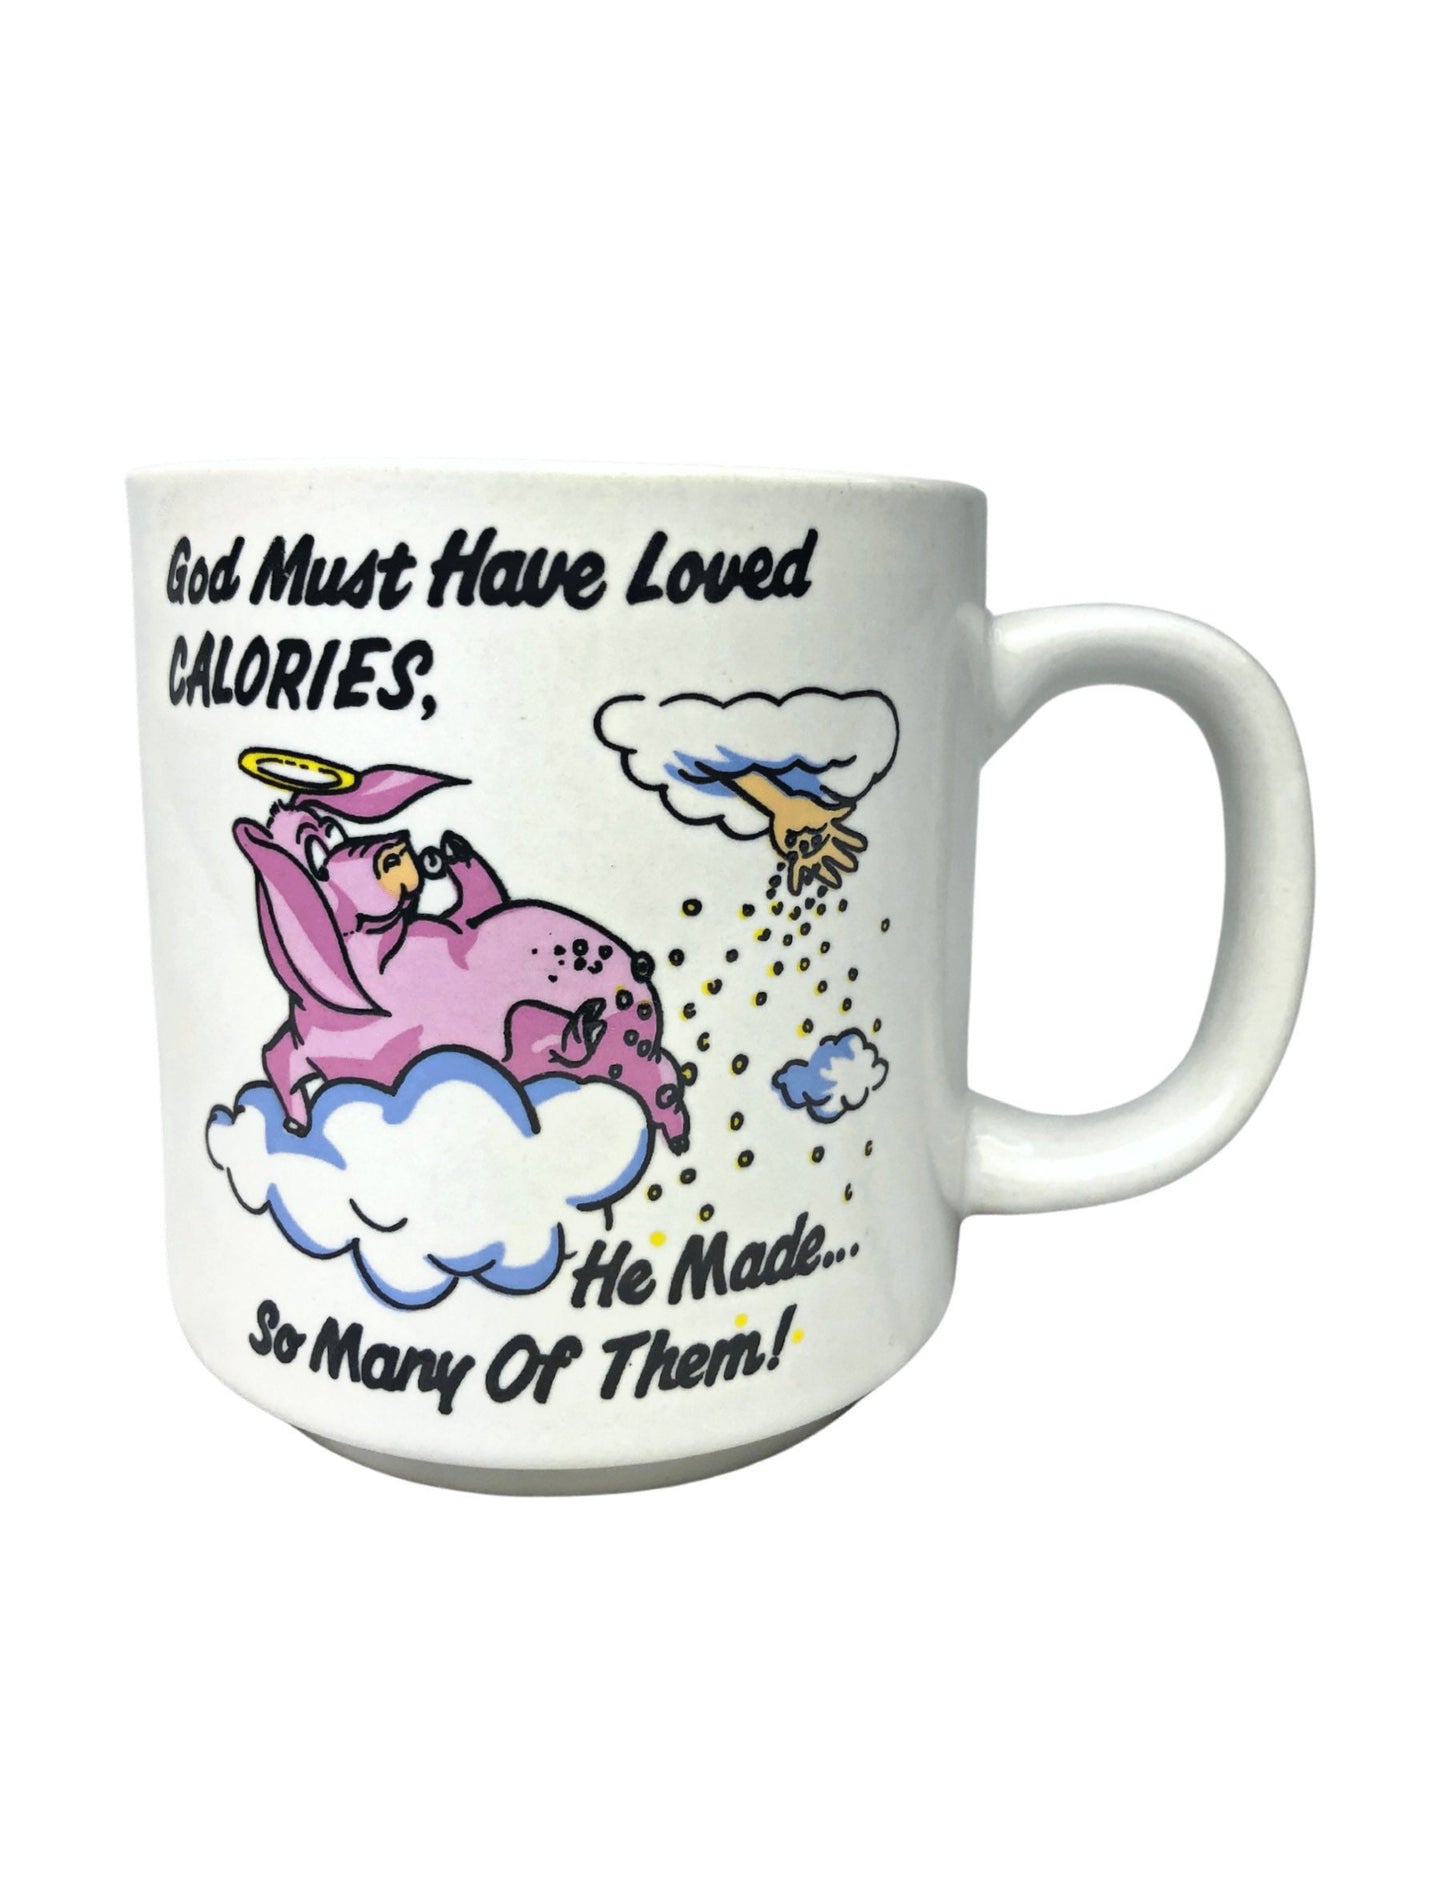 80’s God Must Have Loved Calories, He Made So Many of Them! Funny Coffee Mug